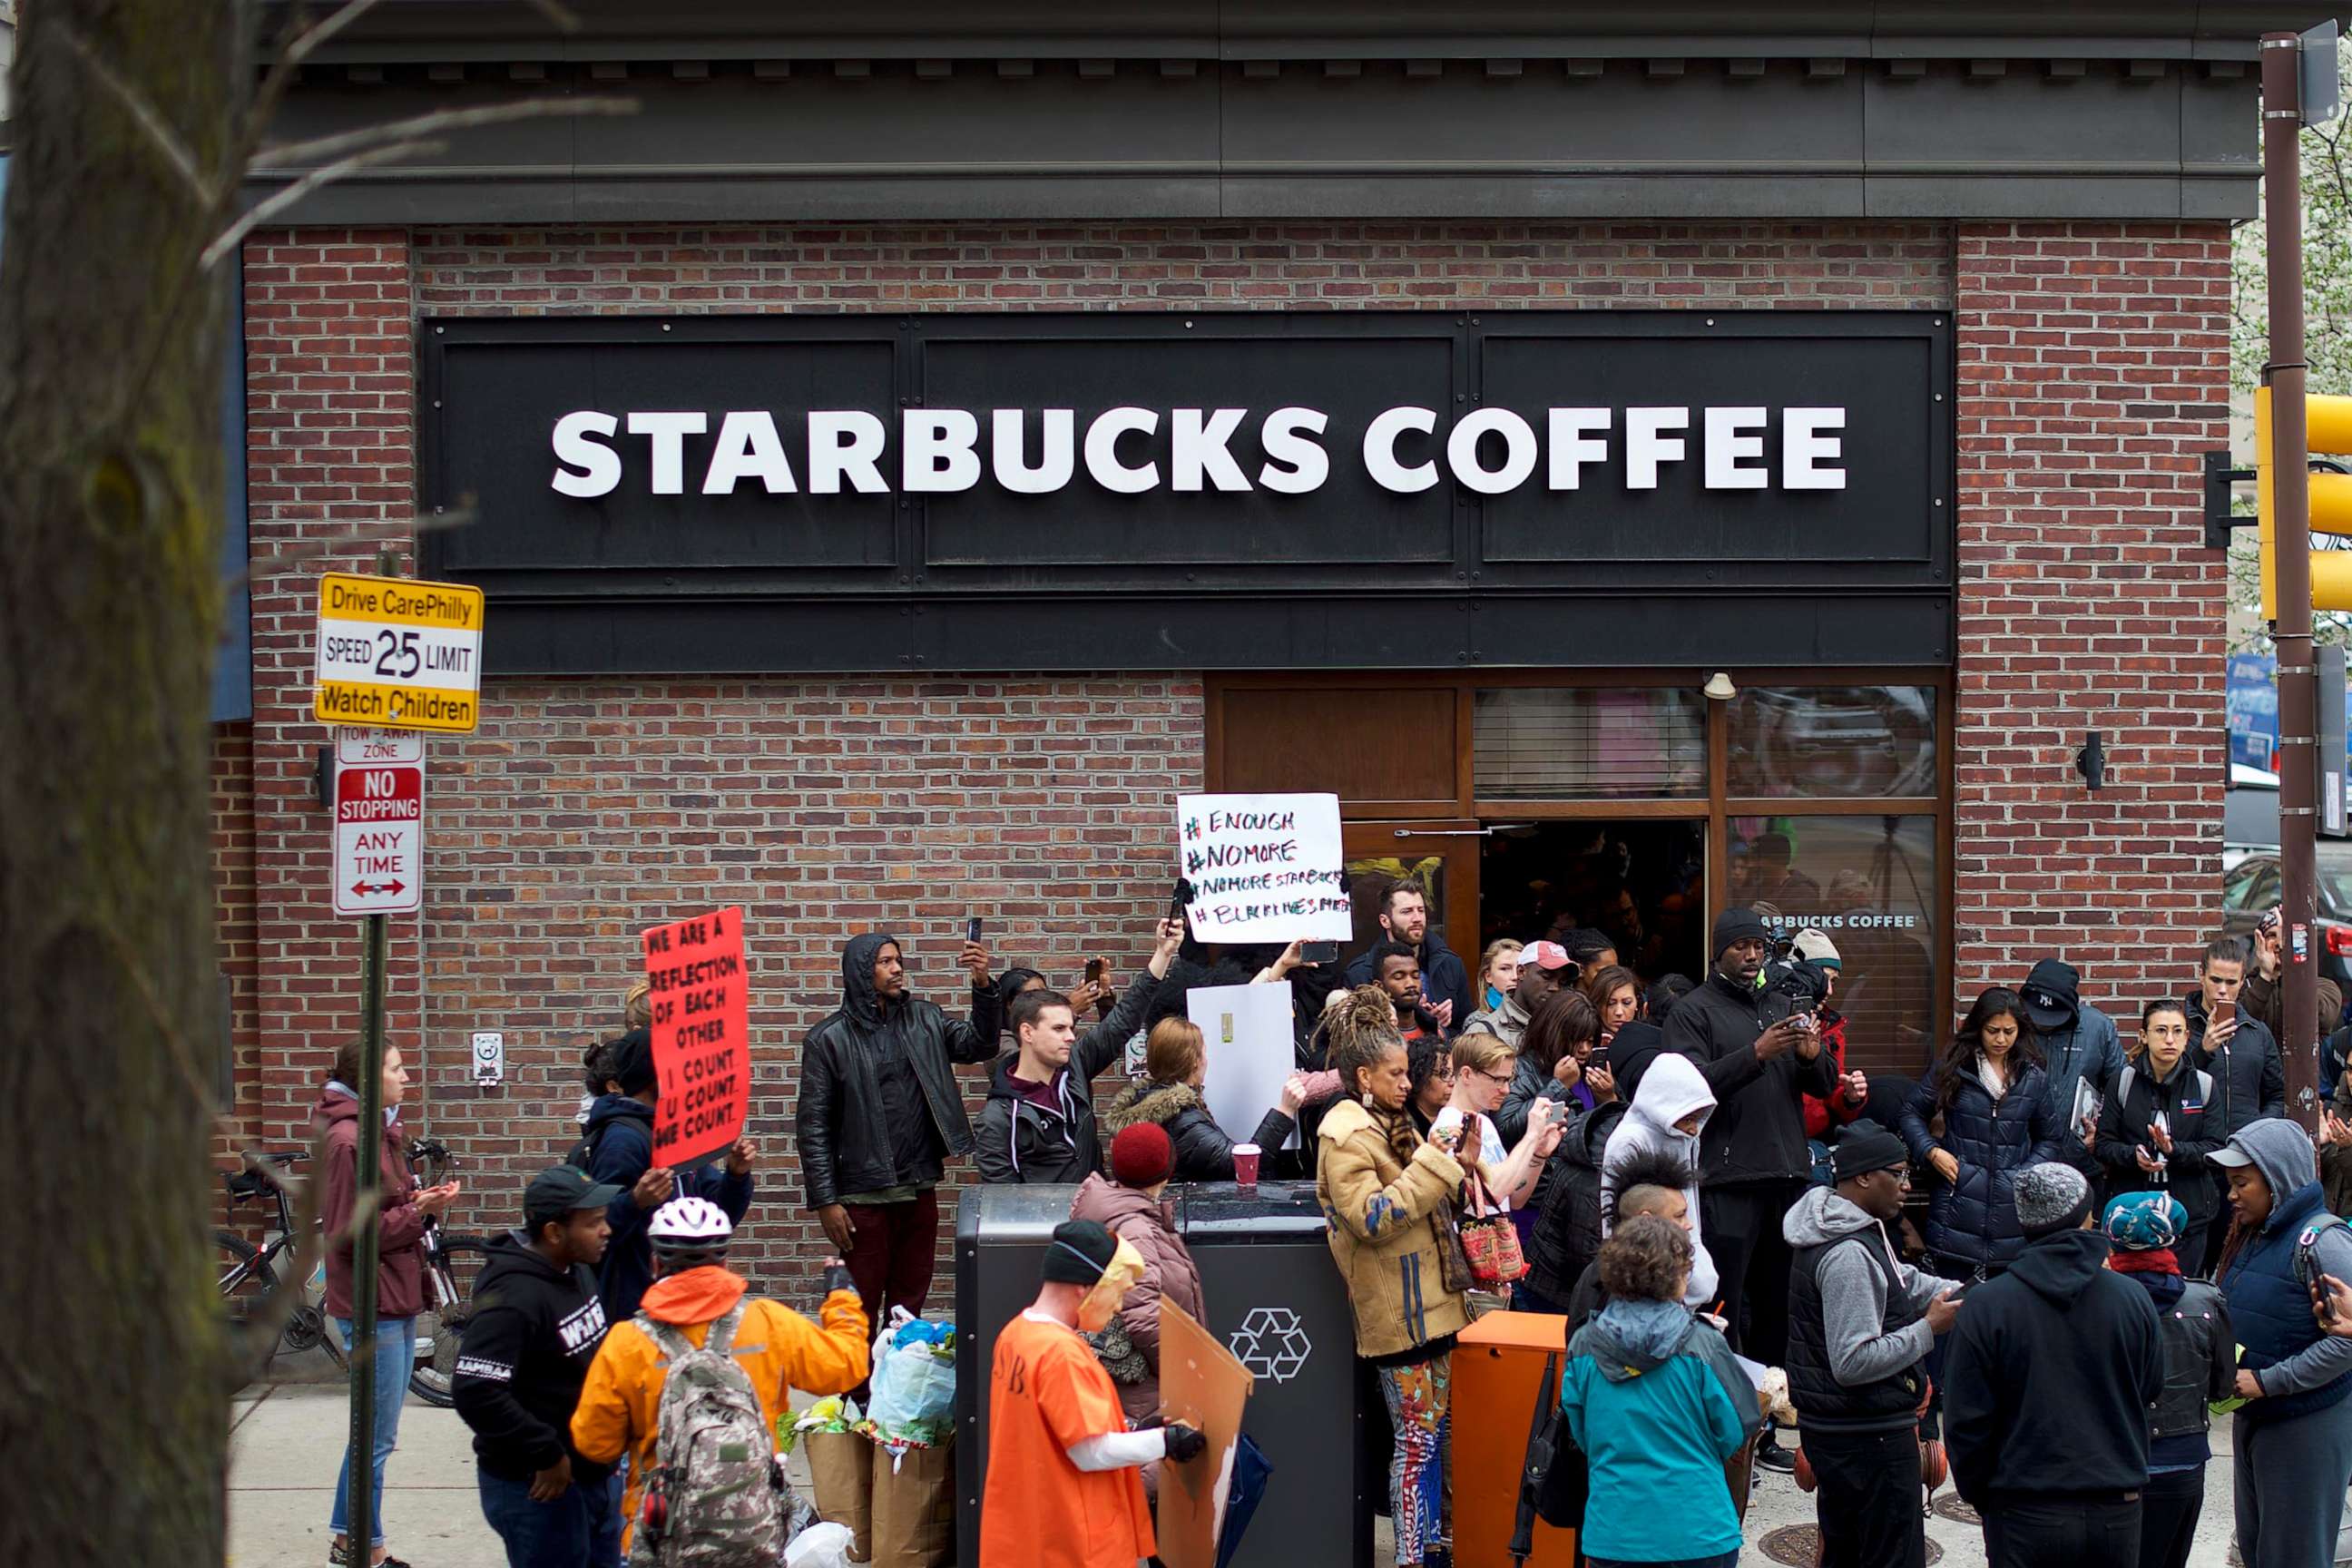 PHOTO: In this April 15, 2018, file photo, protestors demonstrate outside a Starbucks in Philadelphia. Police arrested two black men who were waiting inside the Starbucks which prompted an apology from the company's CEO.